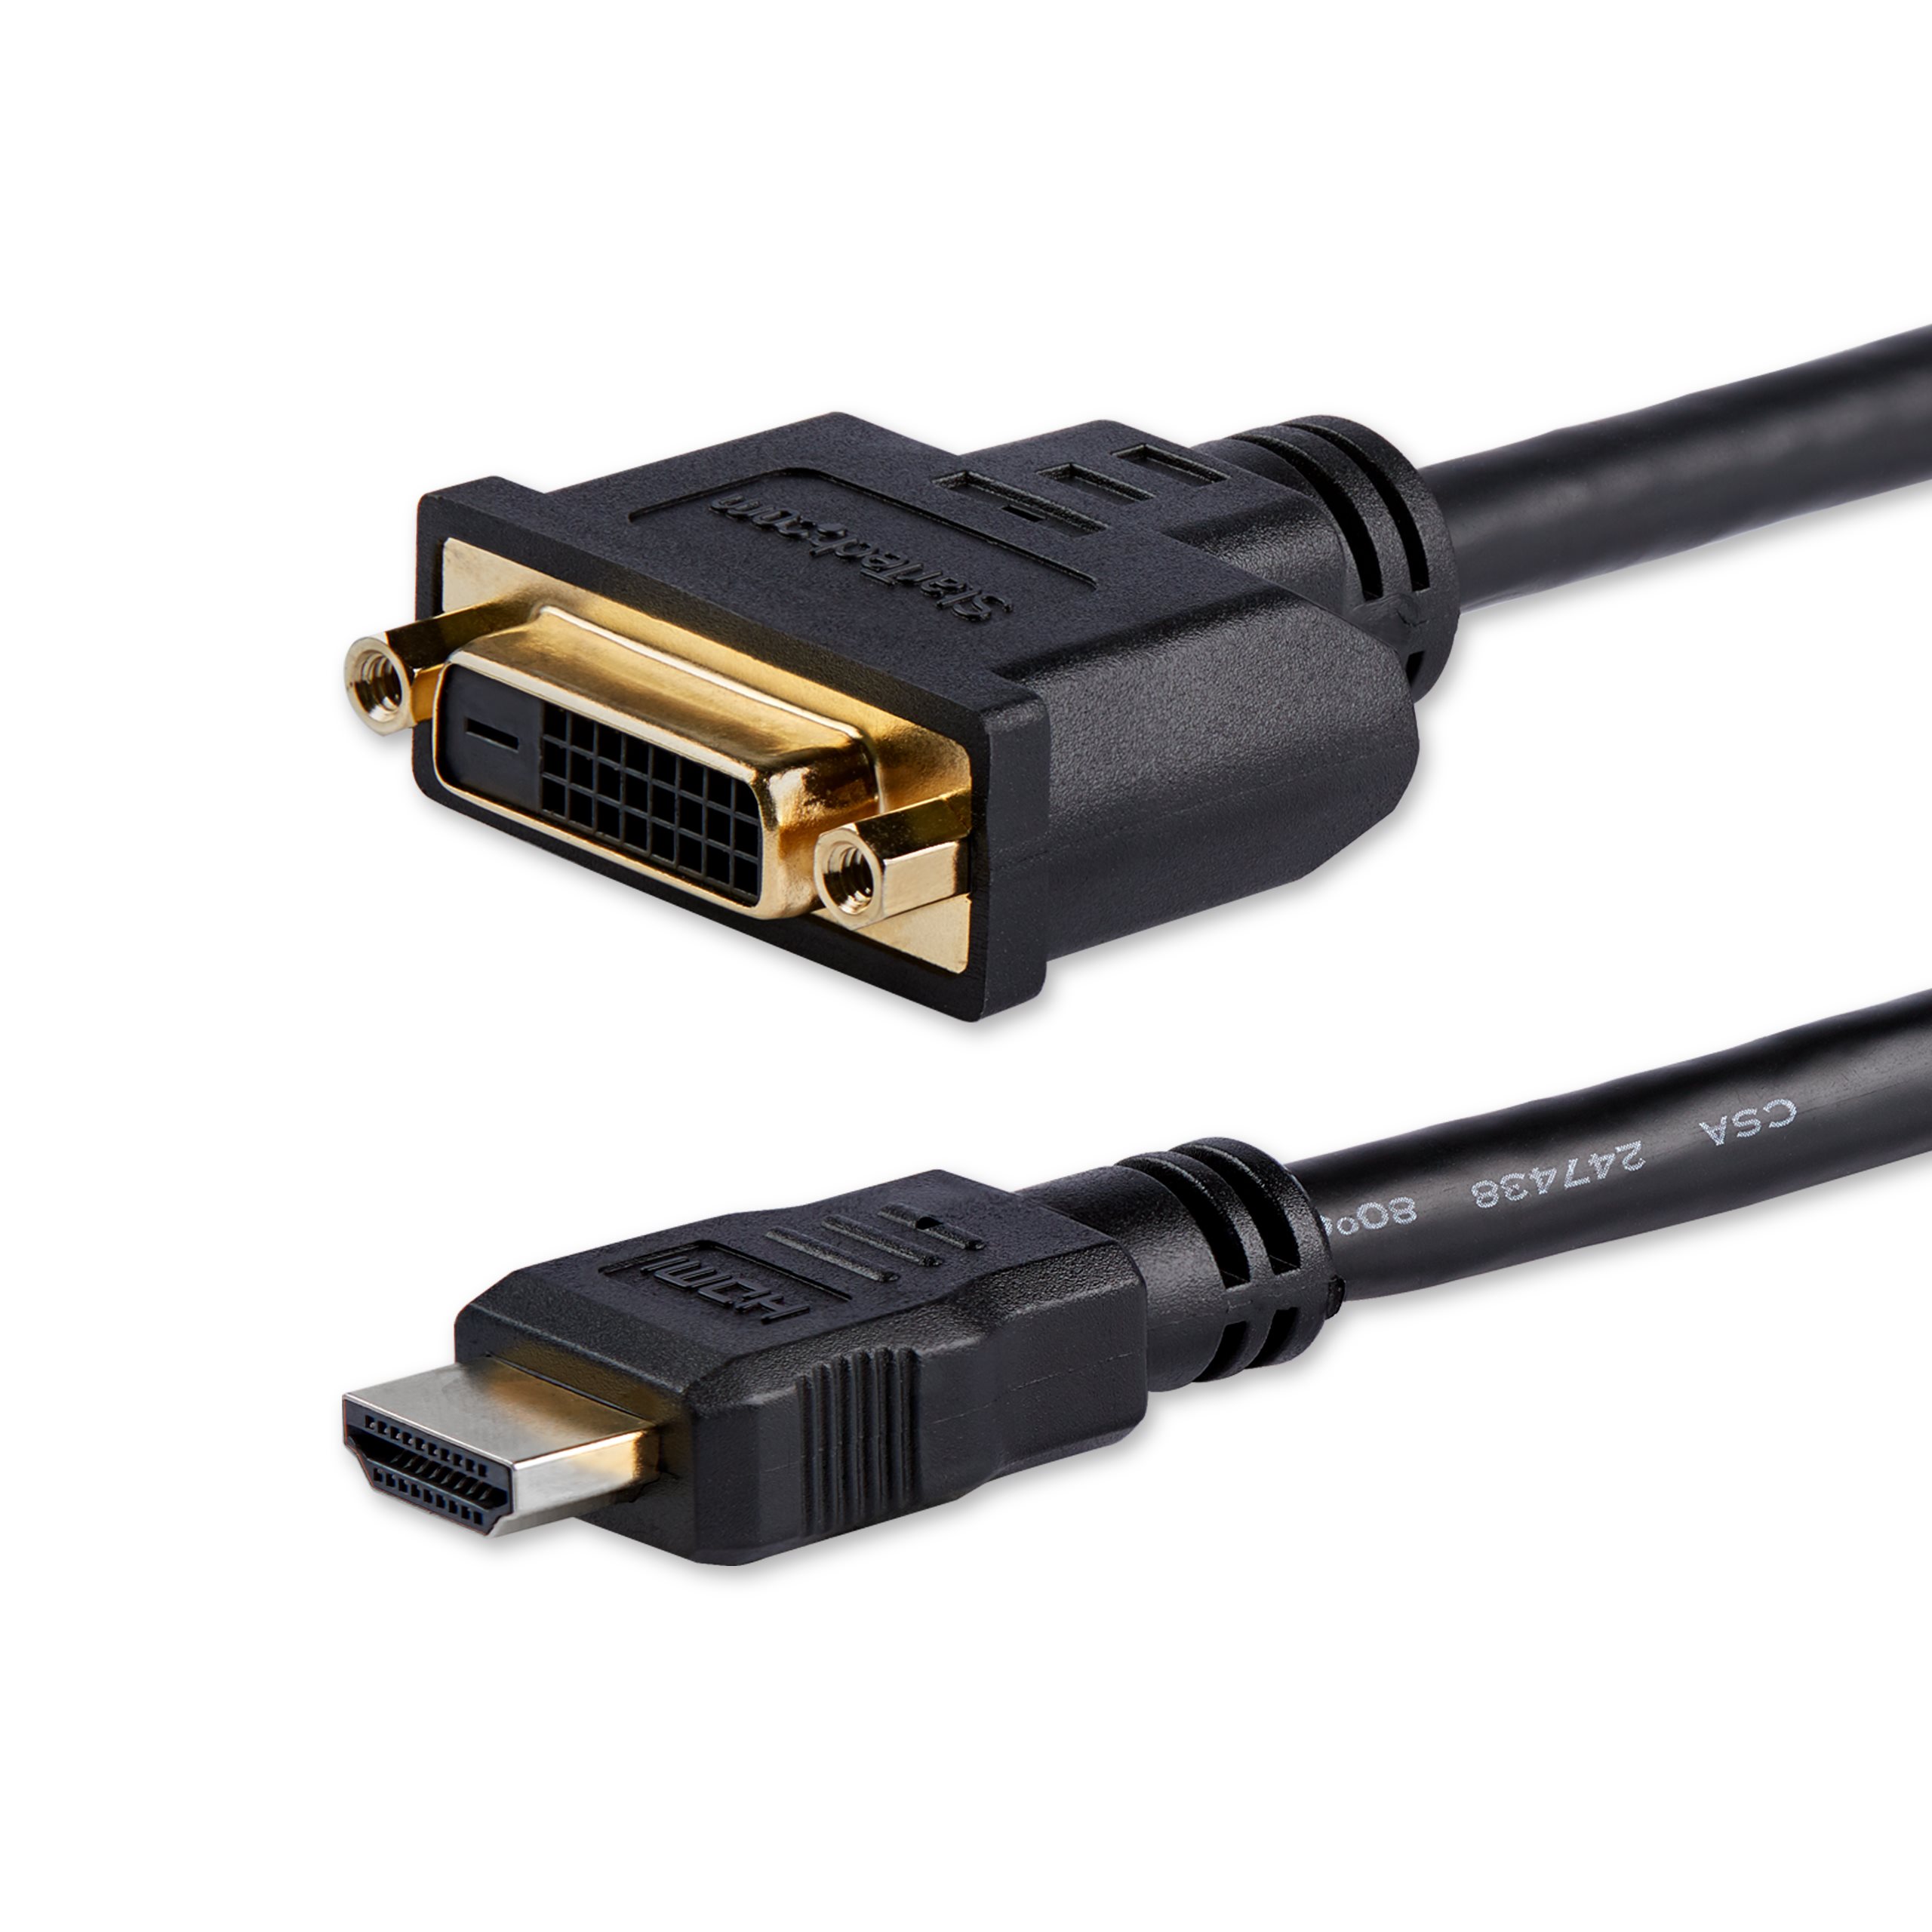 StarTech.com HDMI Male to DVI Female Adapter - - 1080p DVI-D Gender Changer Cable (HDDVIMF8IN) - video adapter - ... | Dell Australia